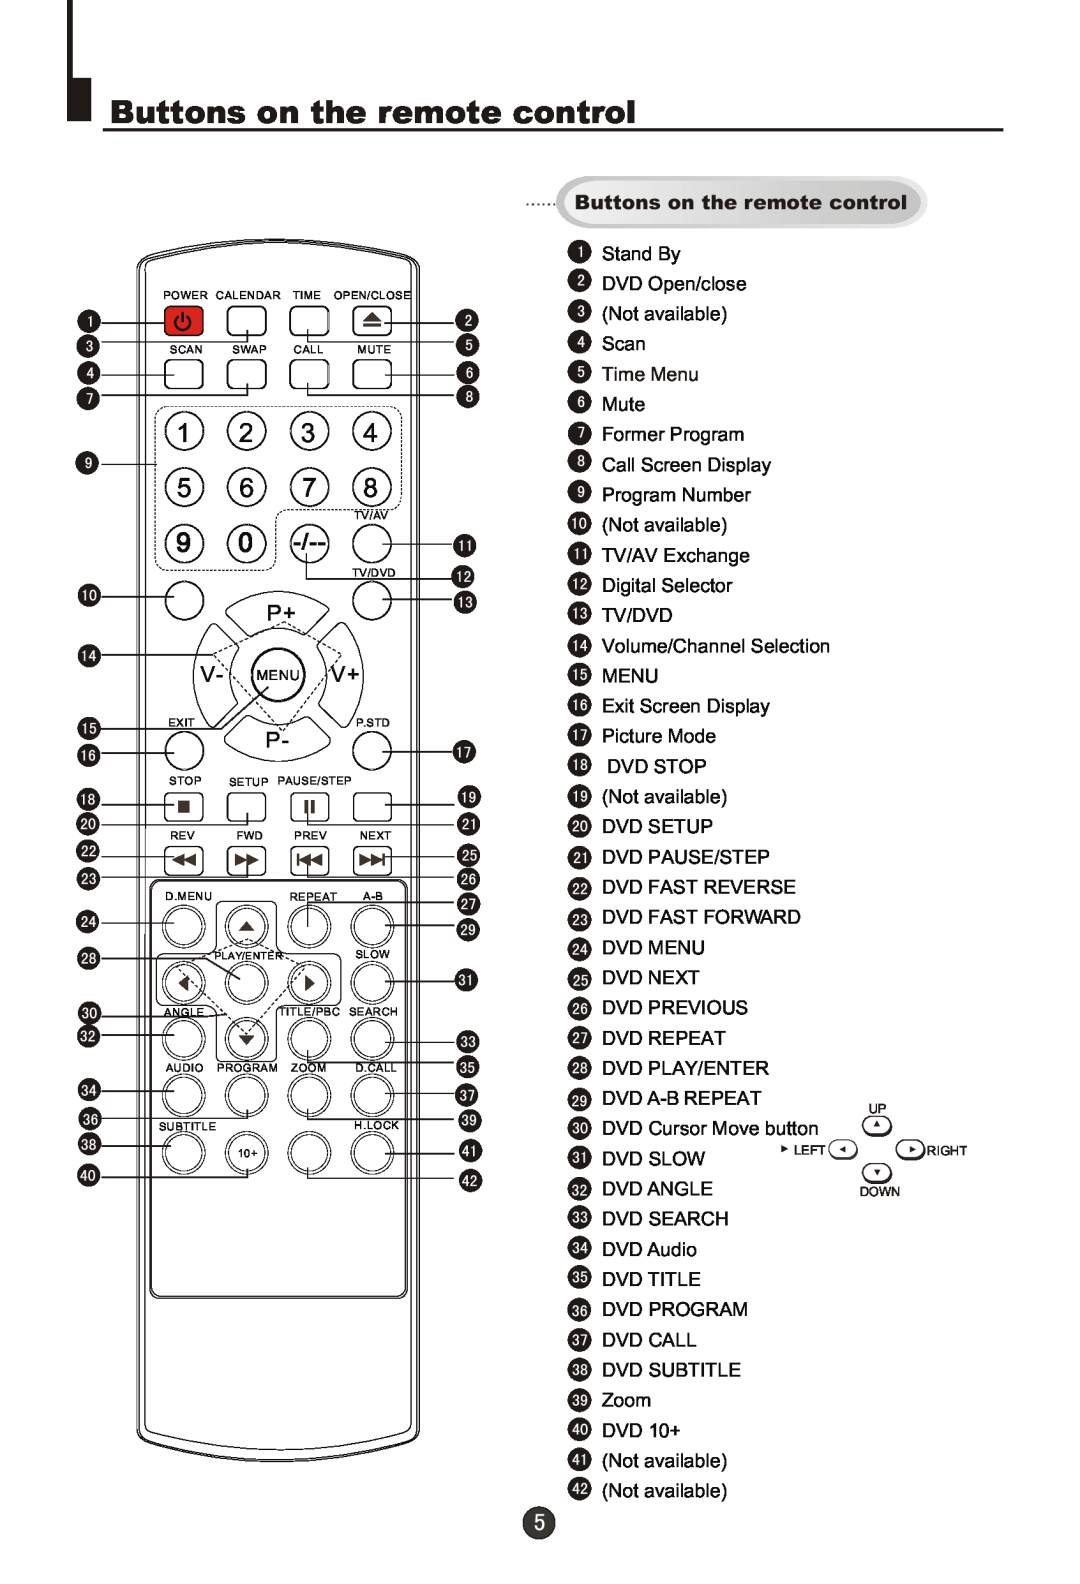 Haier DTA-2198PF owner manual Buttons on the remote control, 1 2 3 5 6 7 